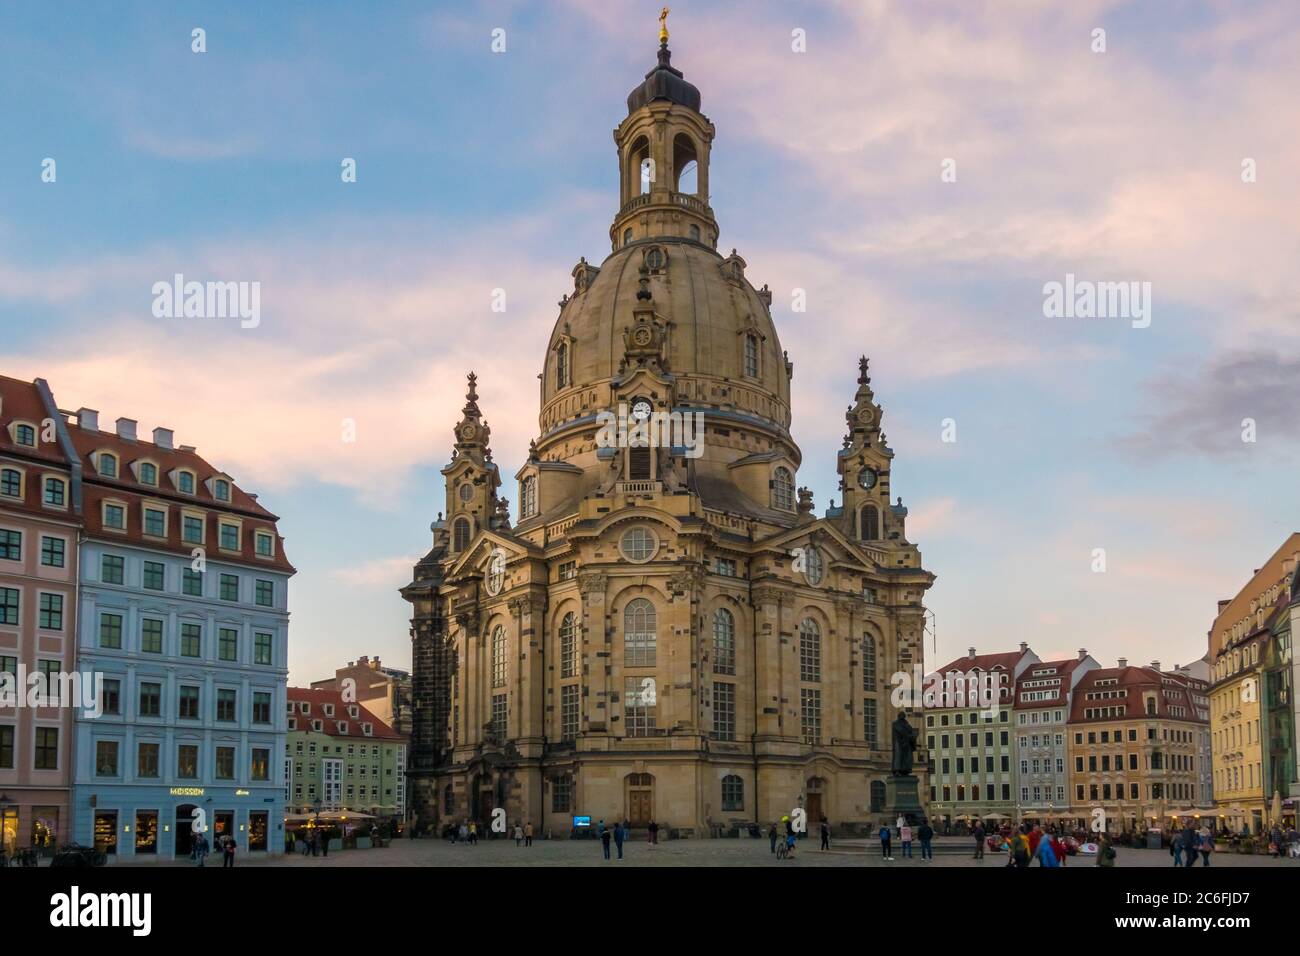 Dresden, Germany - May 18th, 2019: The rebuilt Dresdner Frauenkirche (Church of Our Lady) in the oldtown at an enjoyable springtime evening. Stock Photo